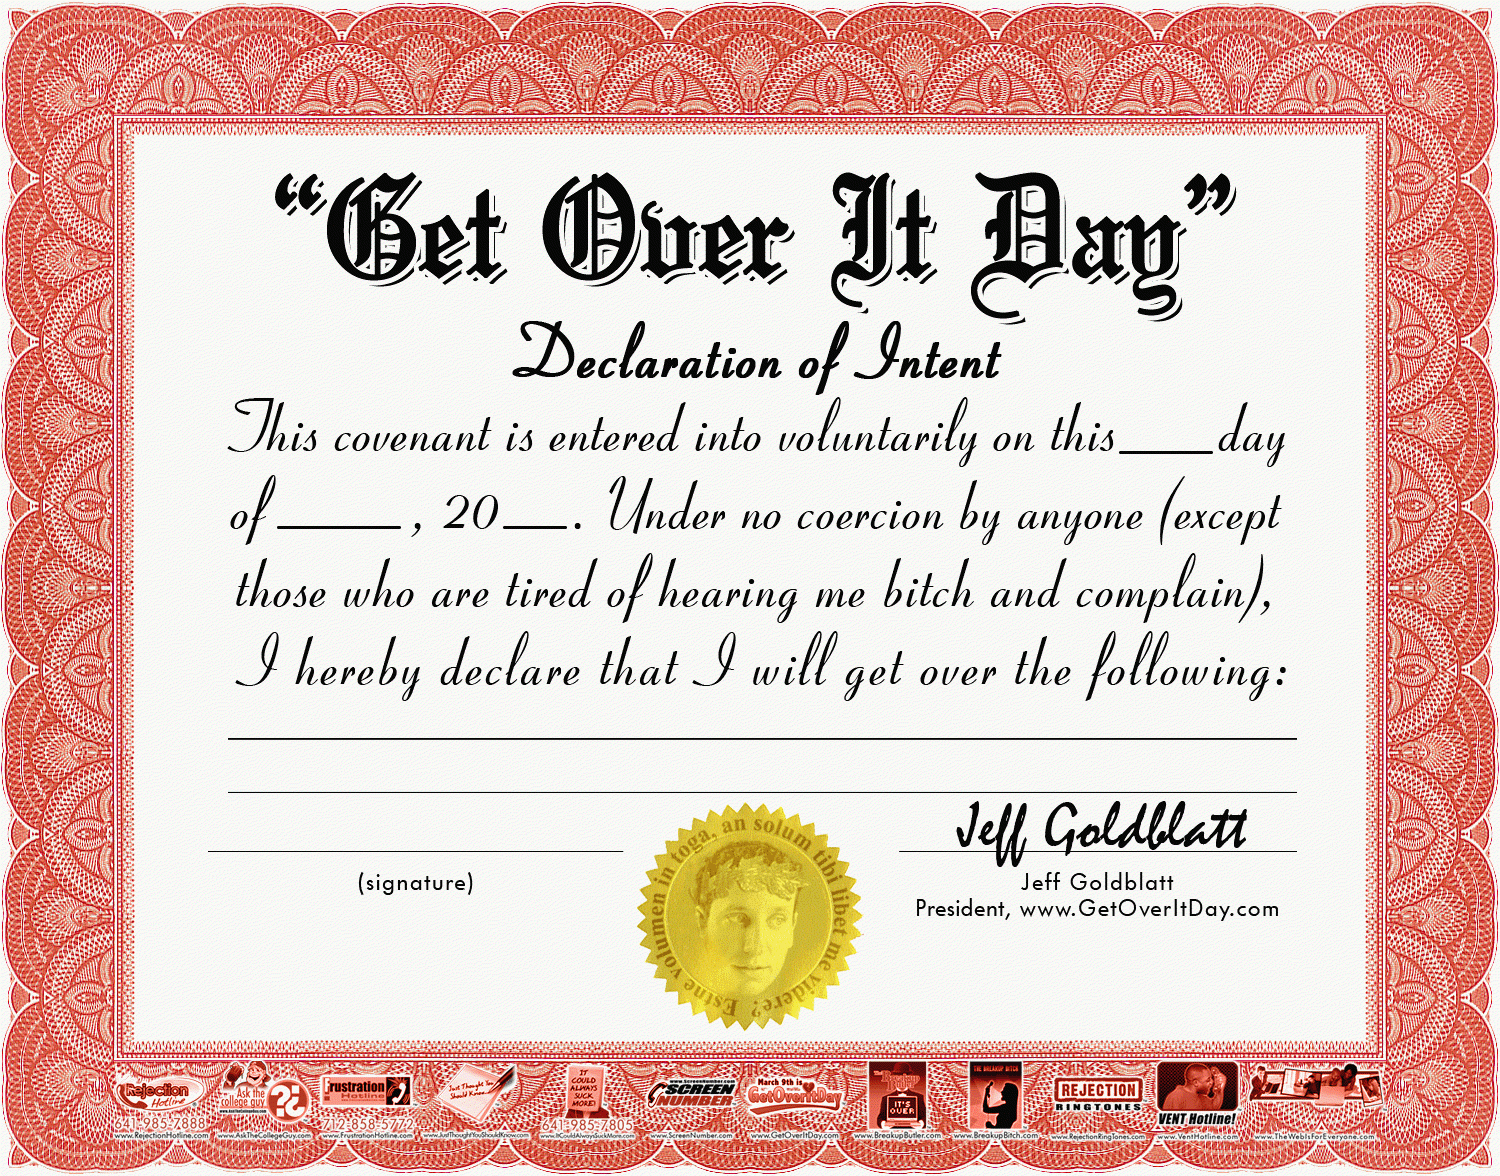 Funny Office Awards Youtube. Silly Certificates Funny Awards With Free Printable Funny Certificate Templates